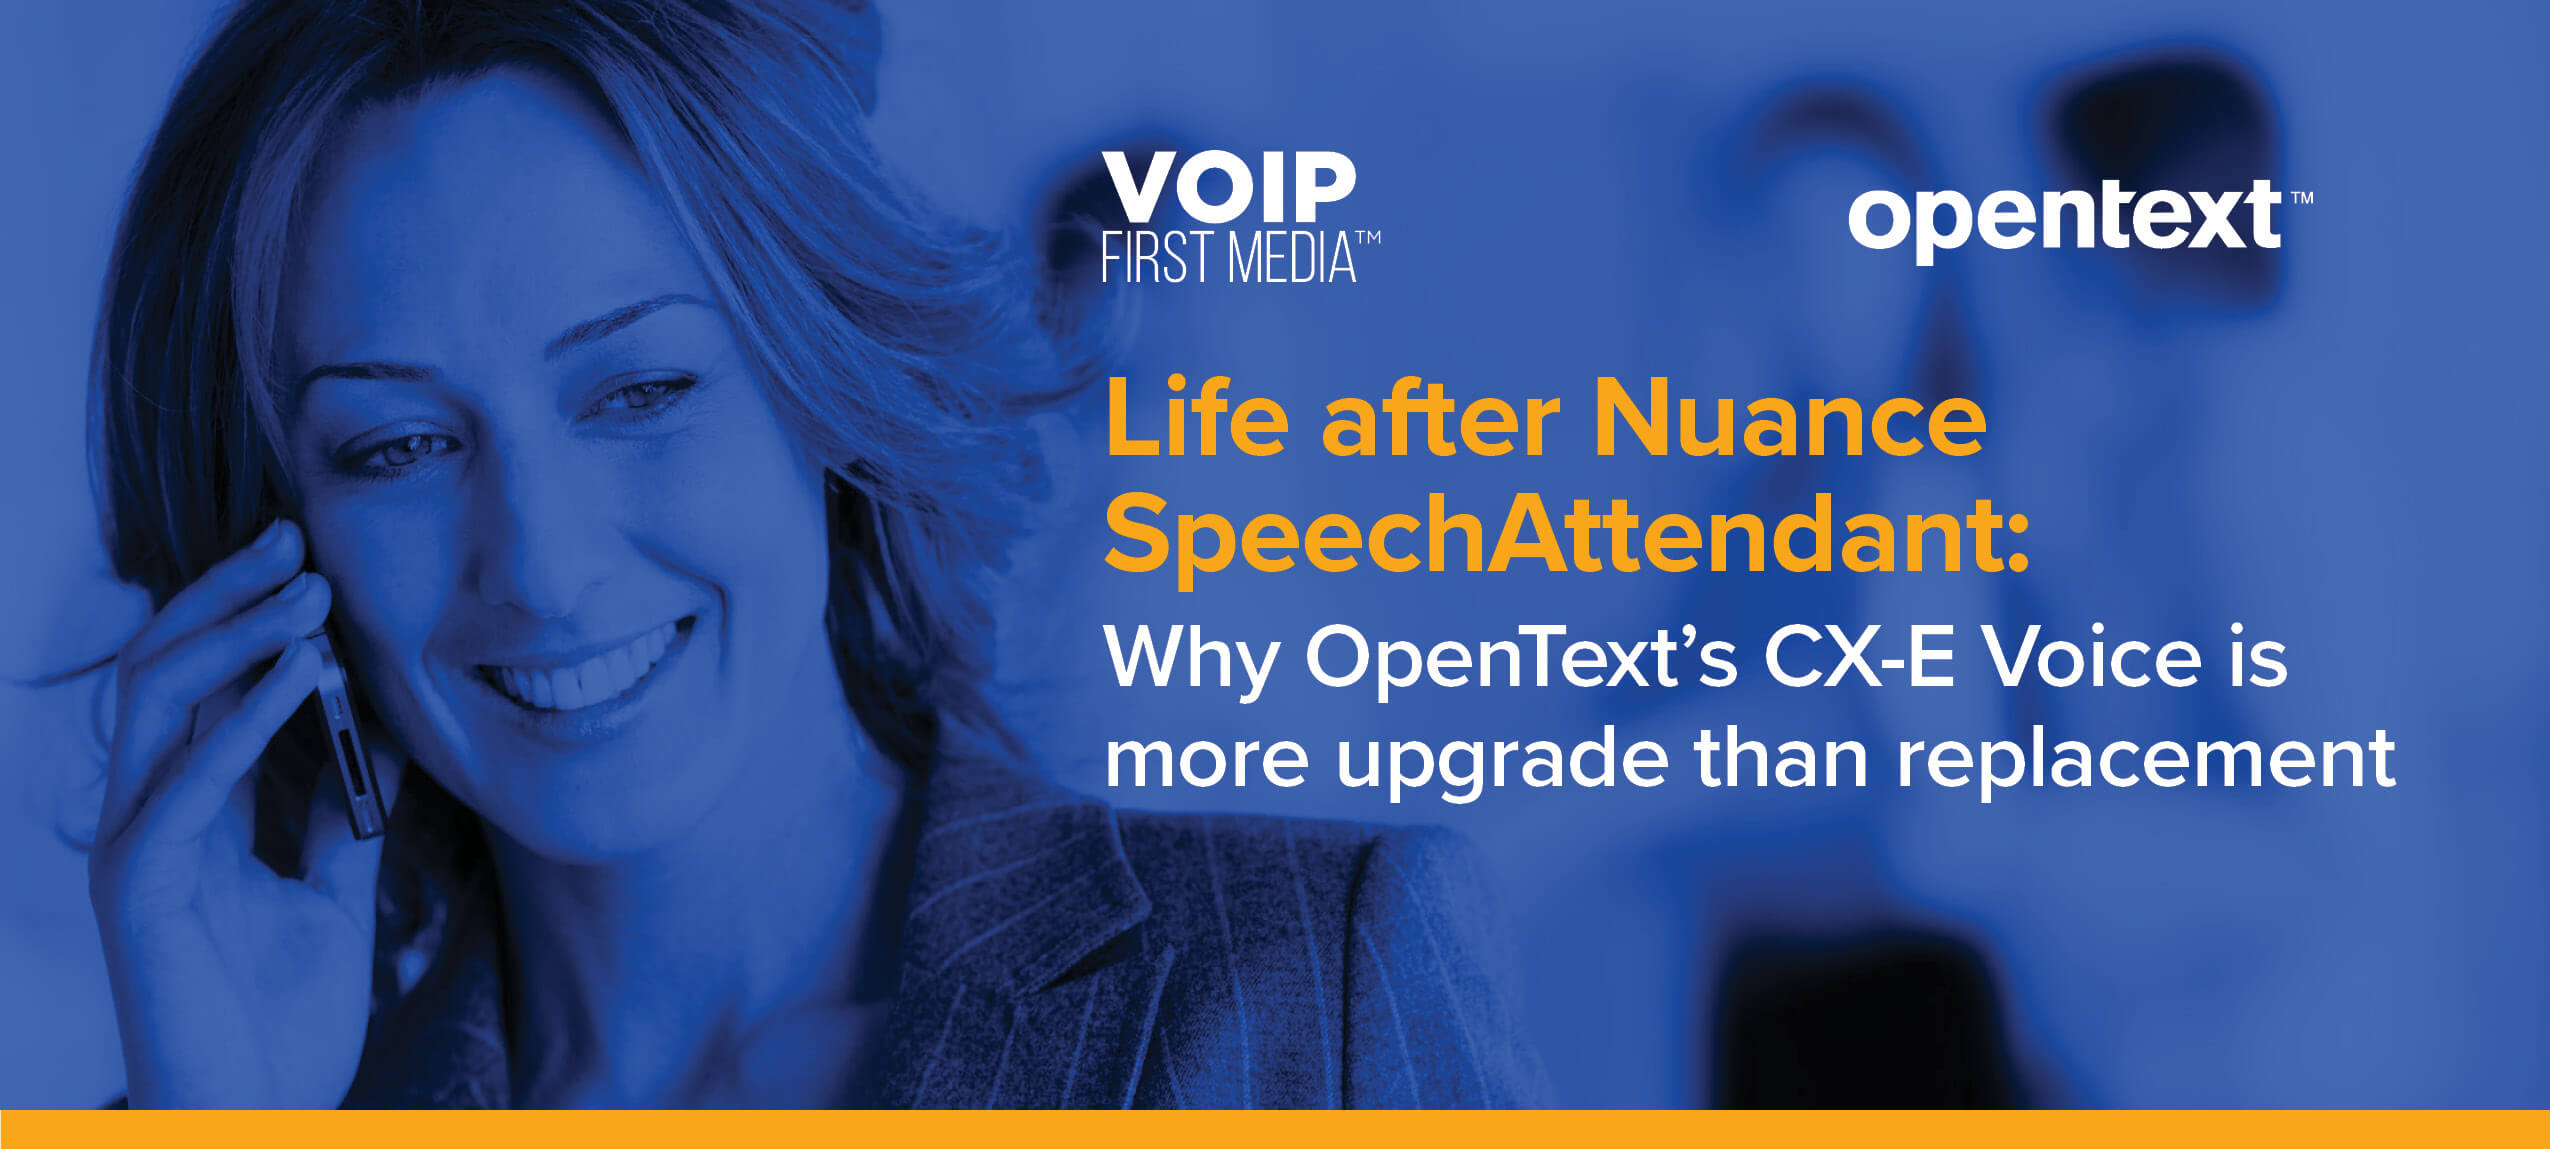 Life after Nuance SpeechAttendant: Why OpenText's CX-E Voice is more upgrade than replacement